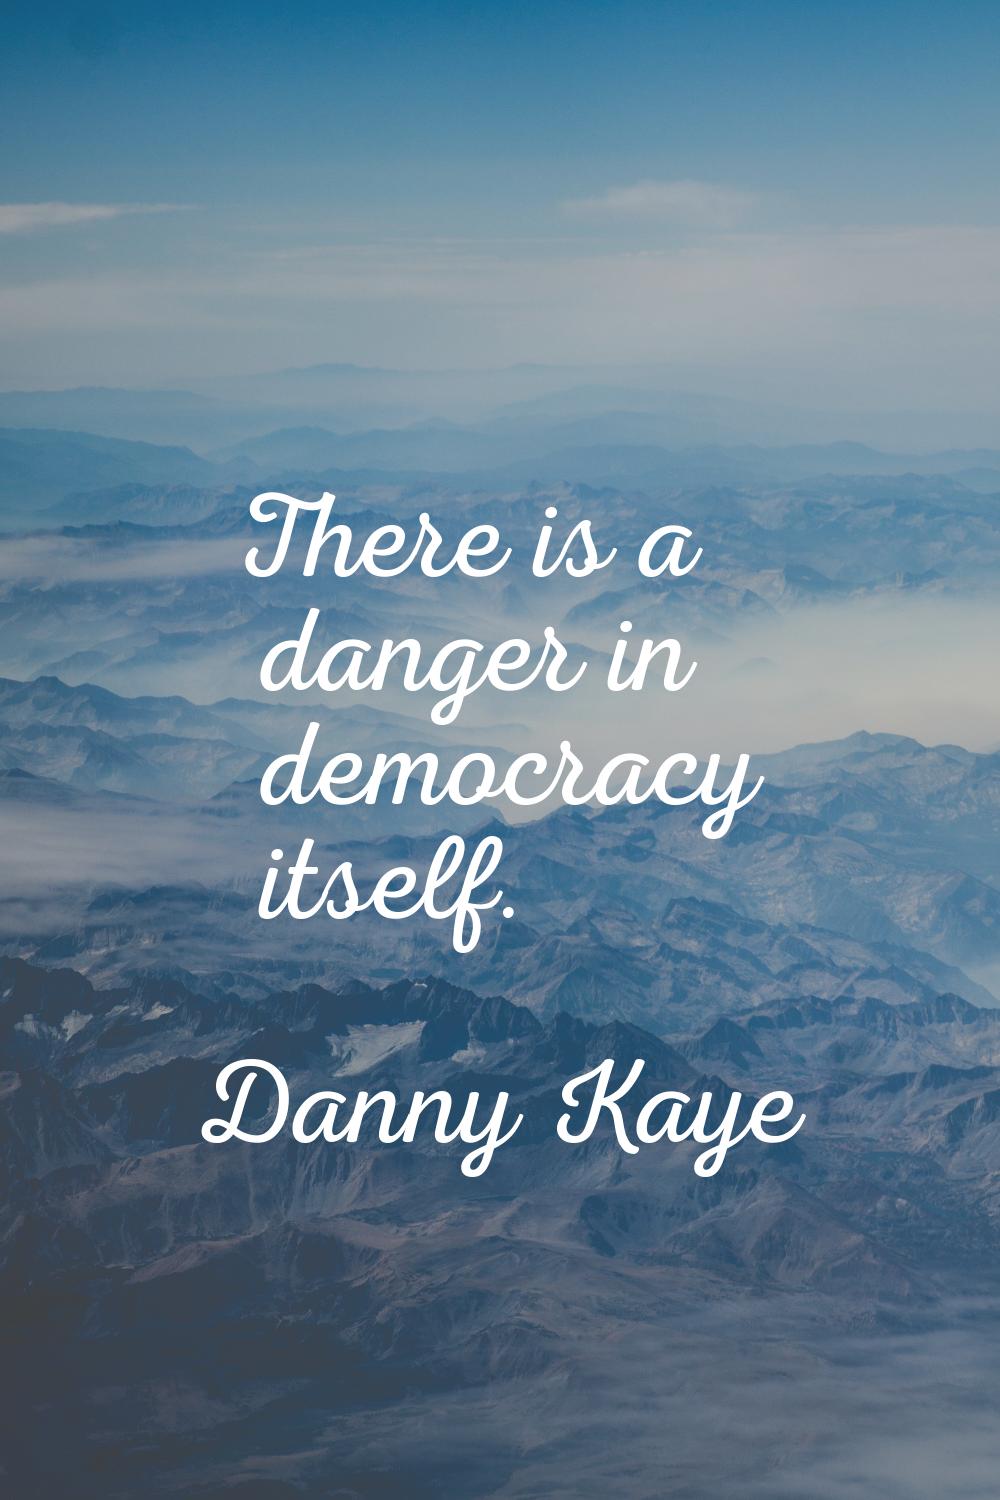 There is a danger in democracy itself.